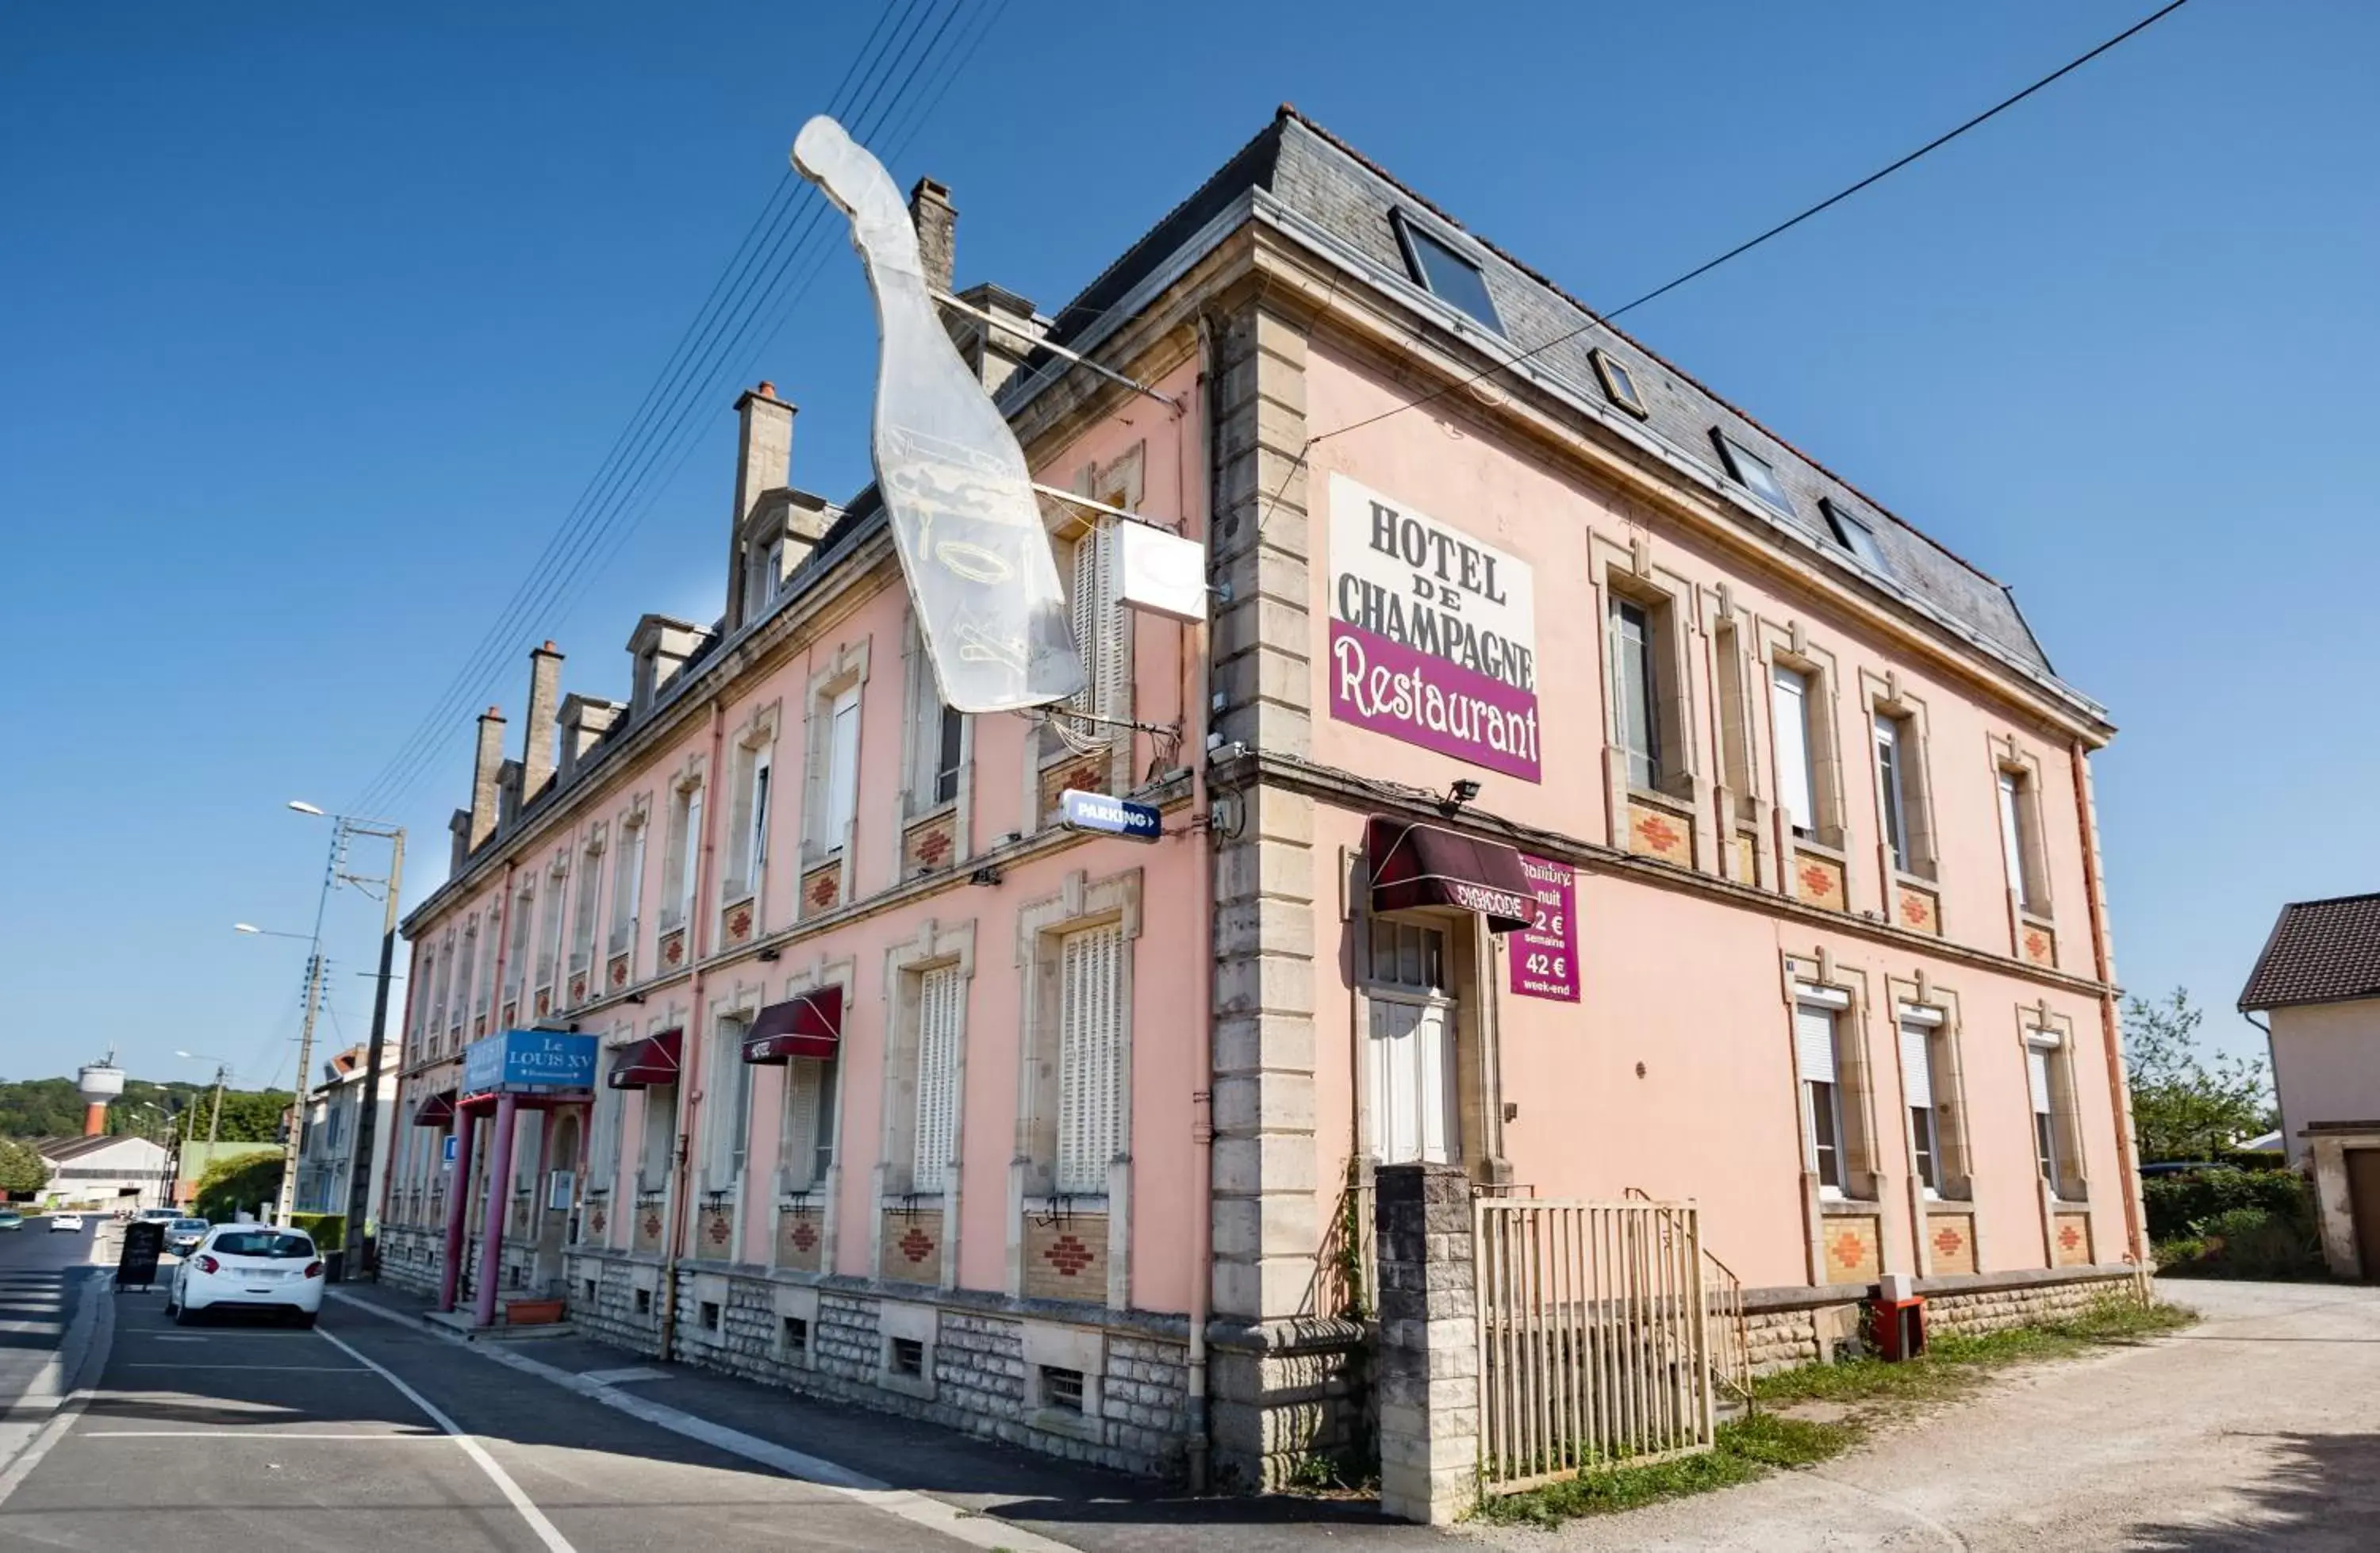 Property Building in Hotel de Champagne